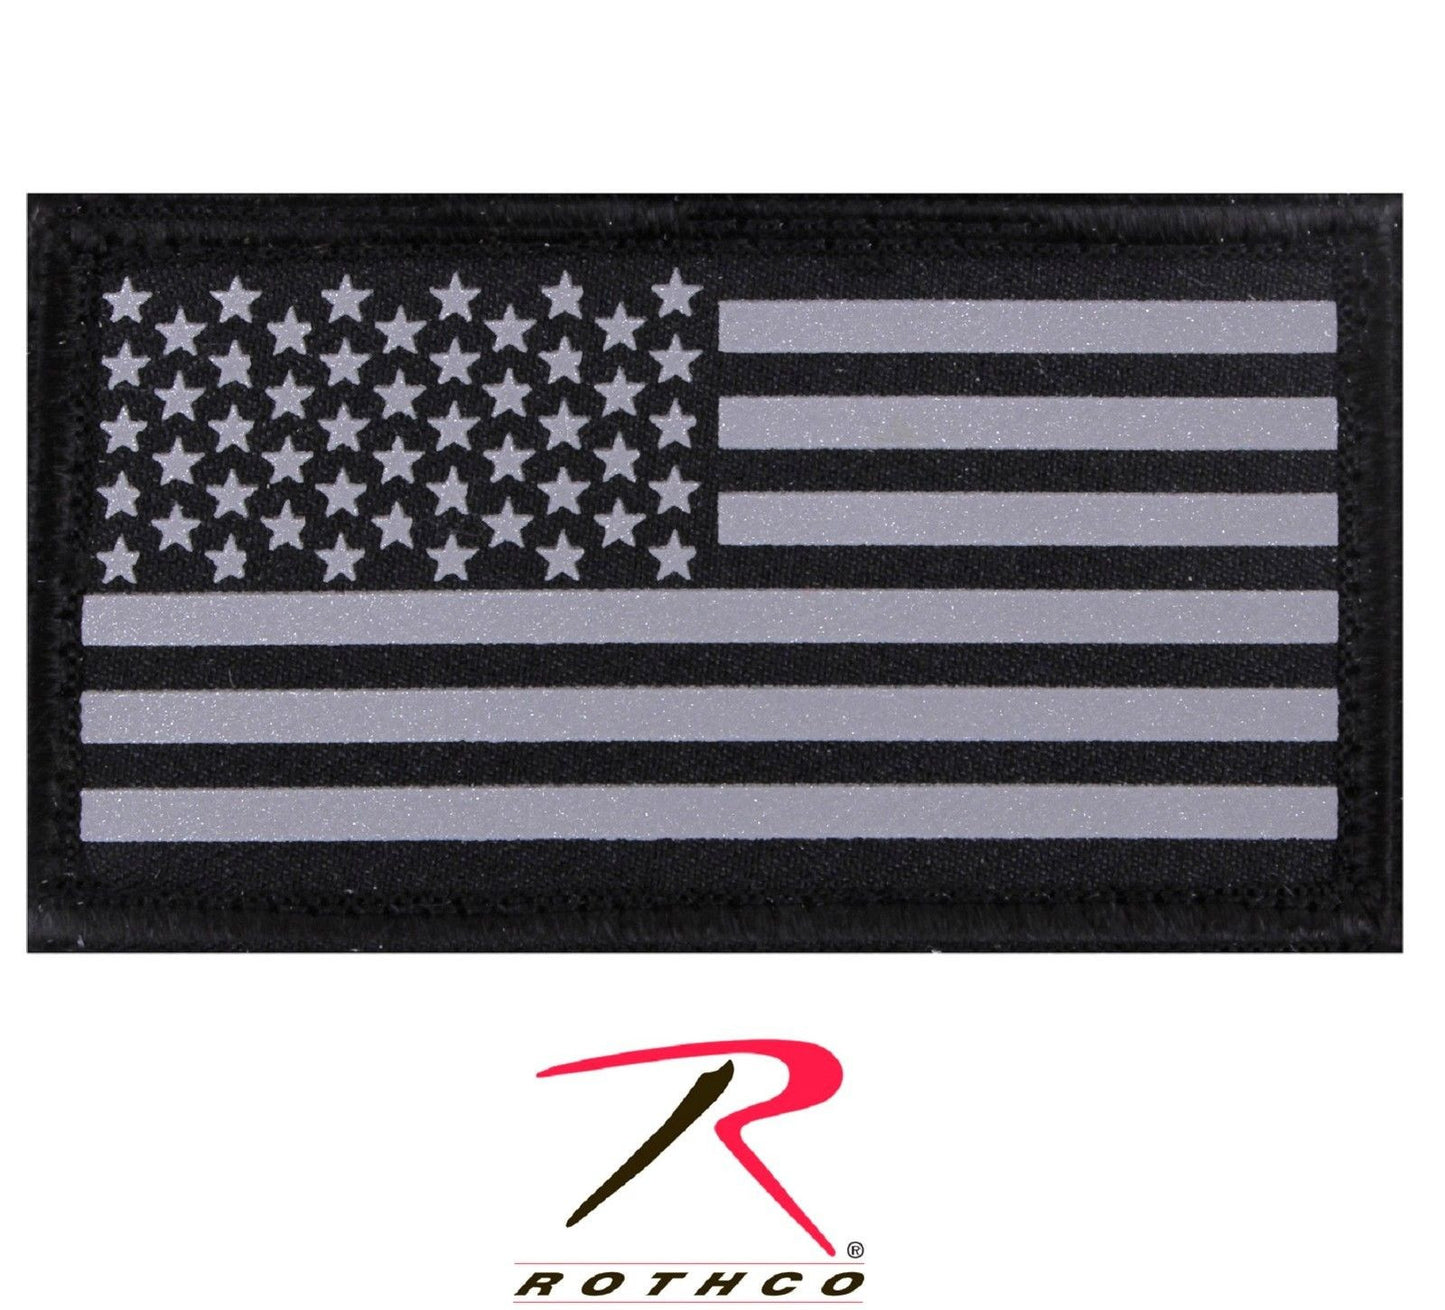 Reflective Silver & Black USA American Flag Tactical Hook Backing Morale Patch